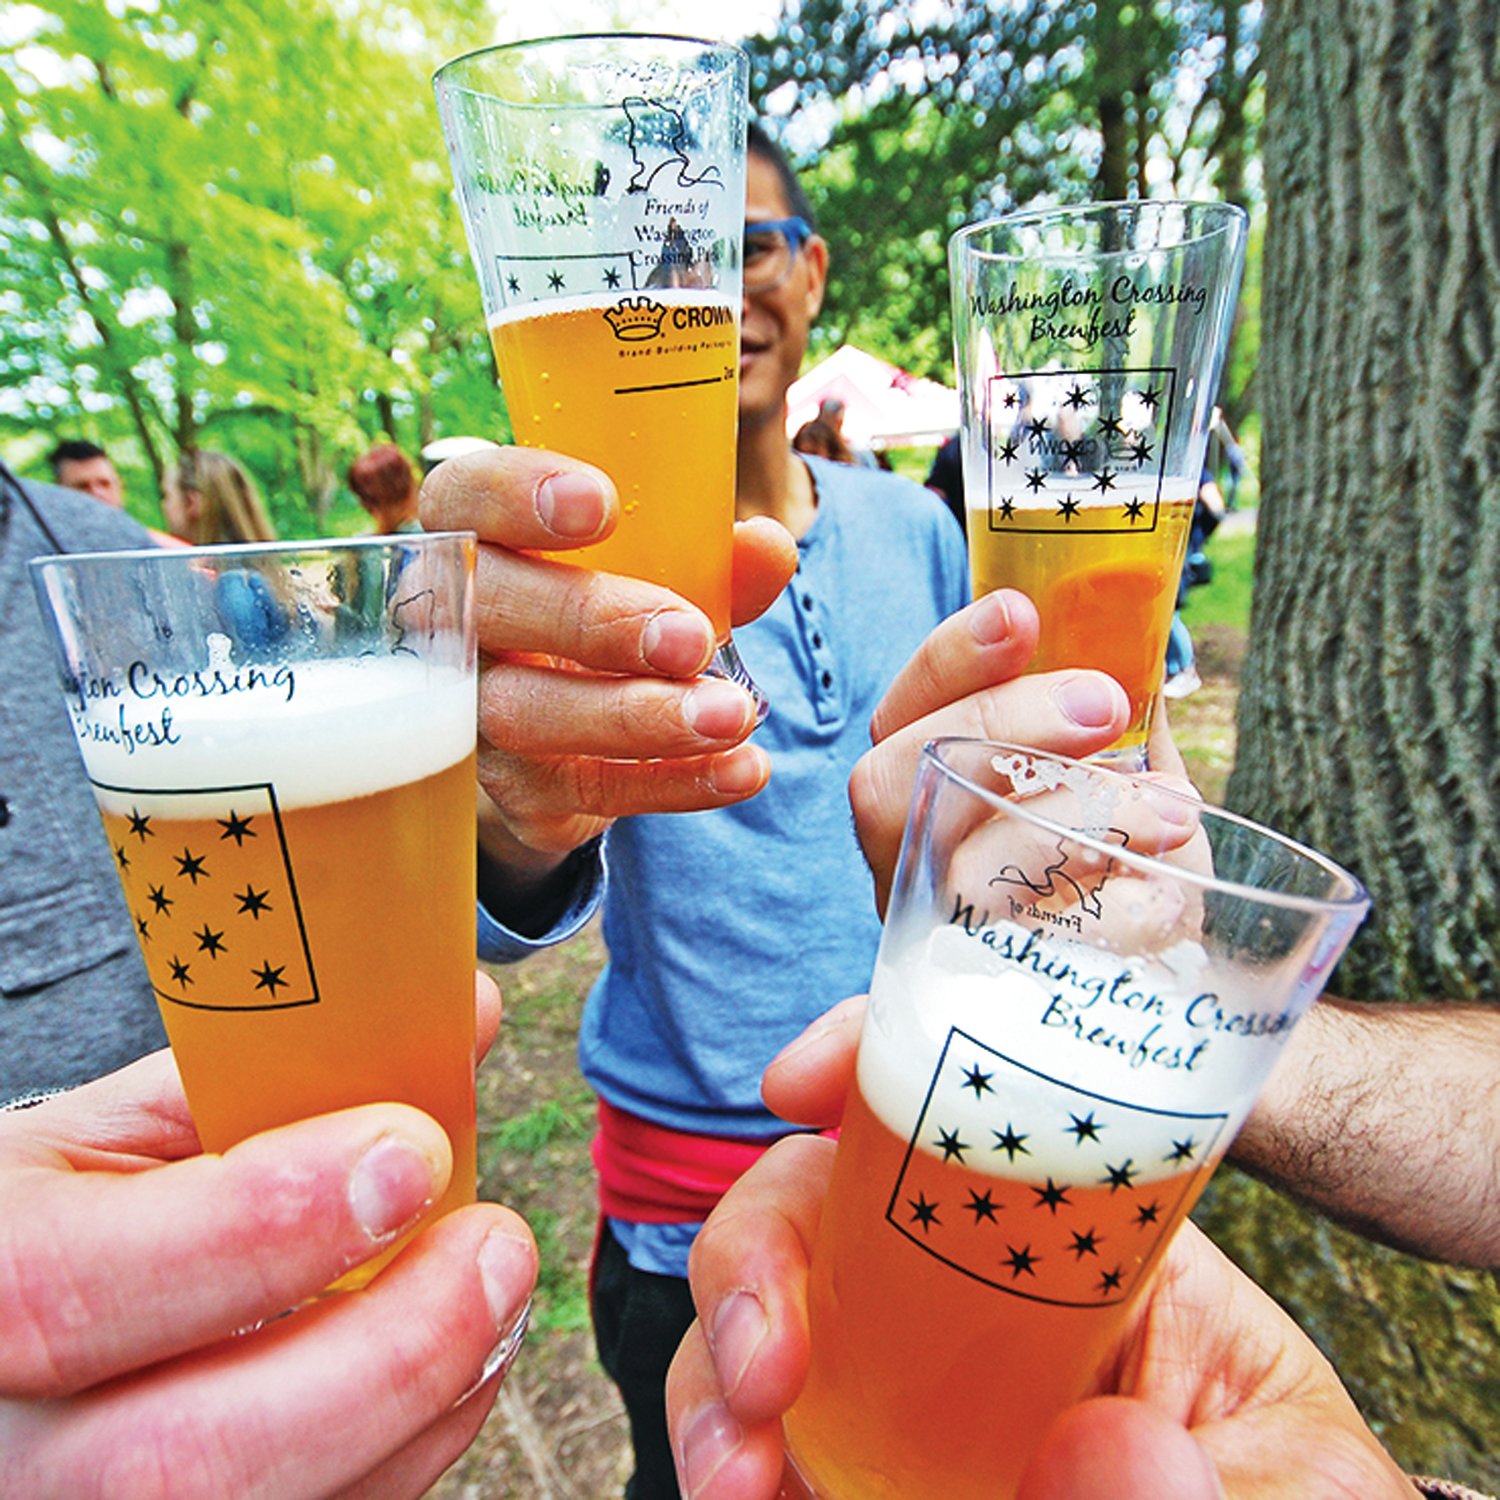 Glasses are raised at a previous Washington Crossing Brewfest.